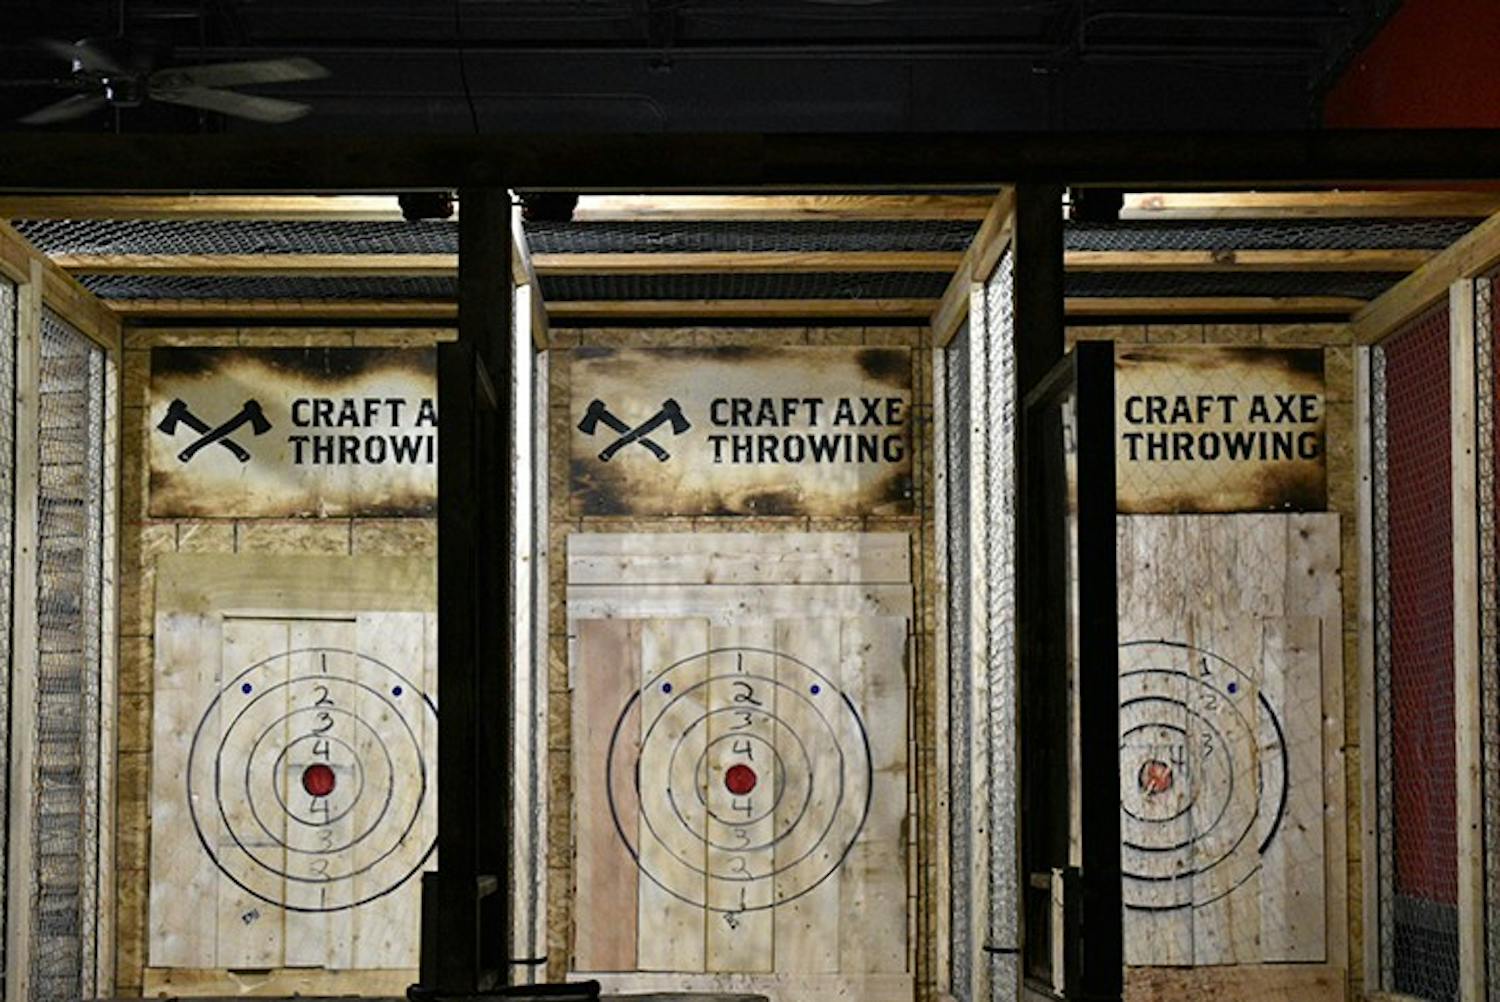 Craft Axe Throwing has divided lanes with bullseye's for customers to throw at.